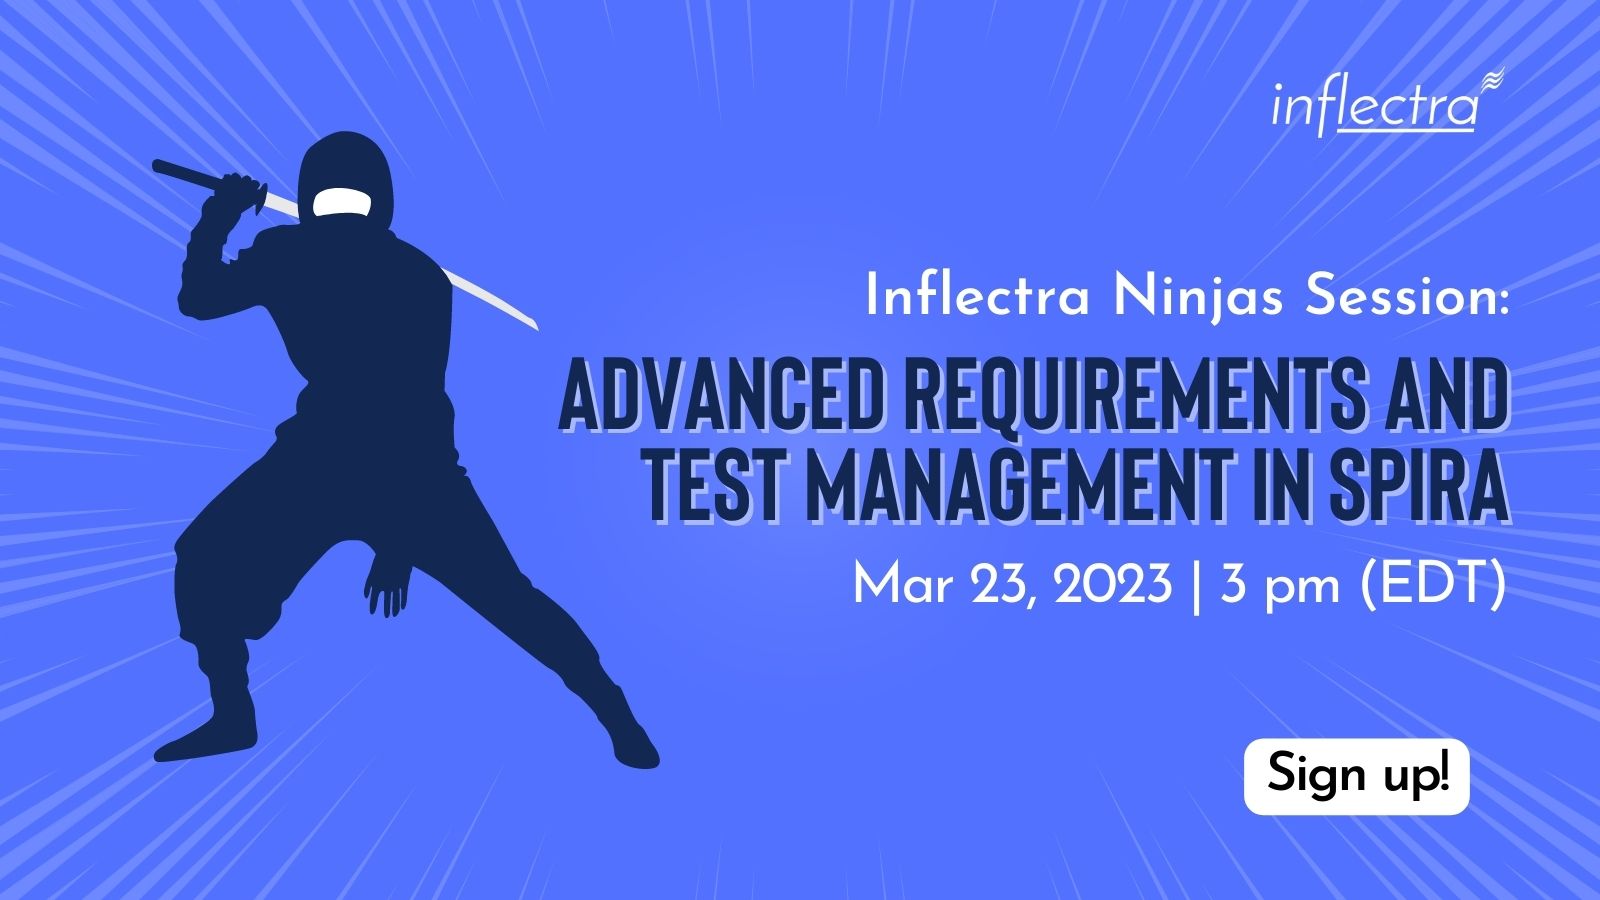 Inflectra Ninjas Session: Advanced Requirements and Test Management in Spira image